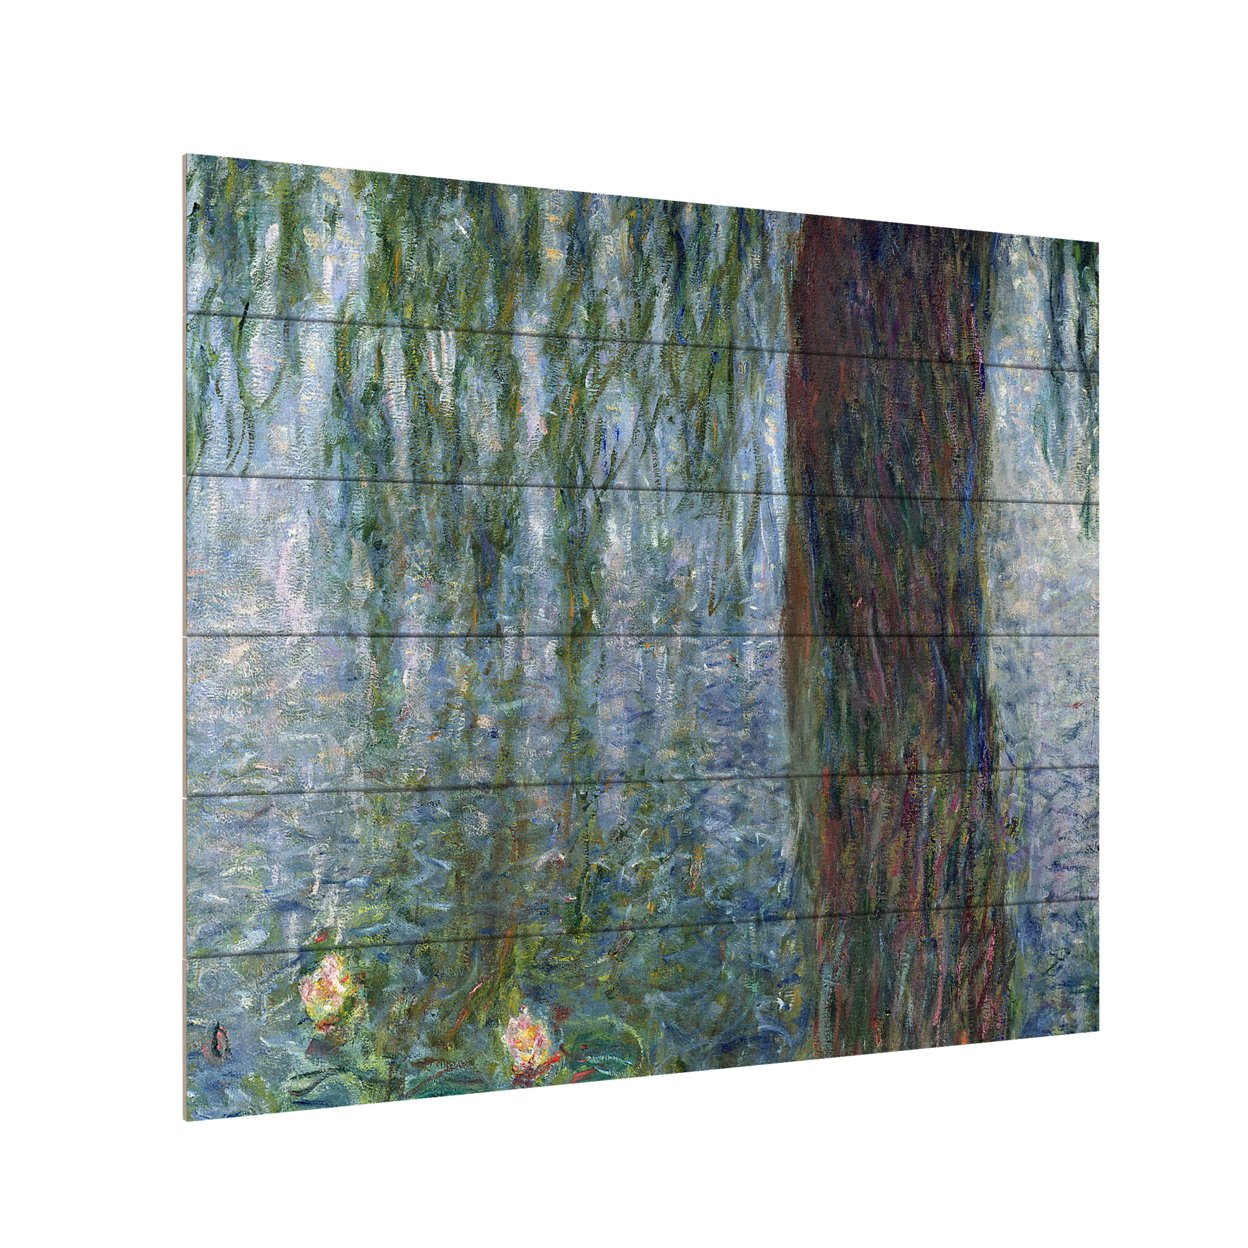 Wooden Slat Art 18 X 22 Inches Titled Waterlillies Morning Ready To Hang Home Decor Picture